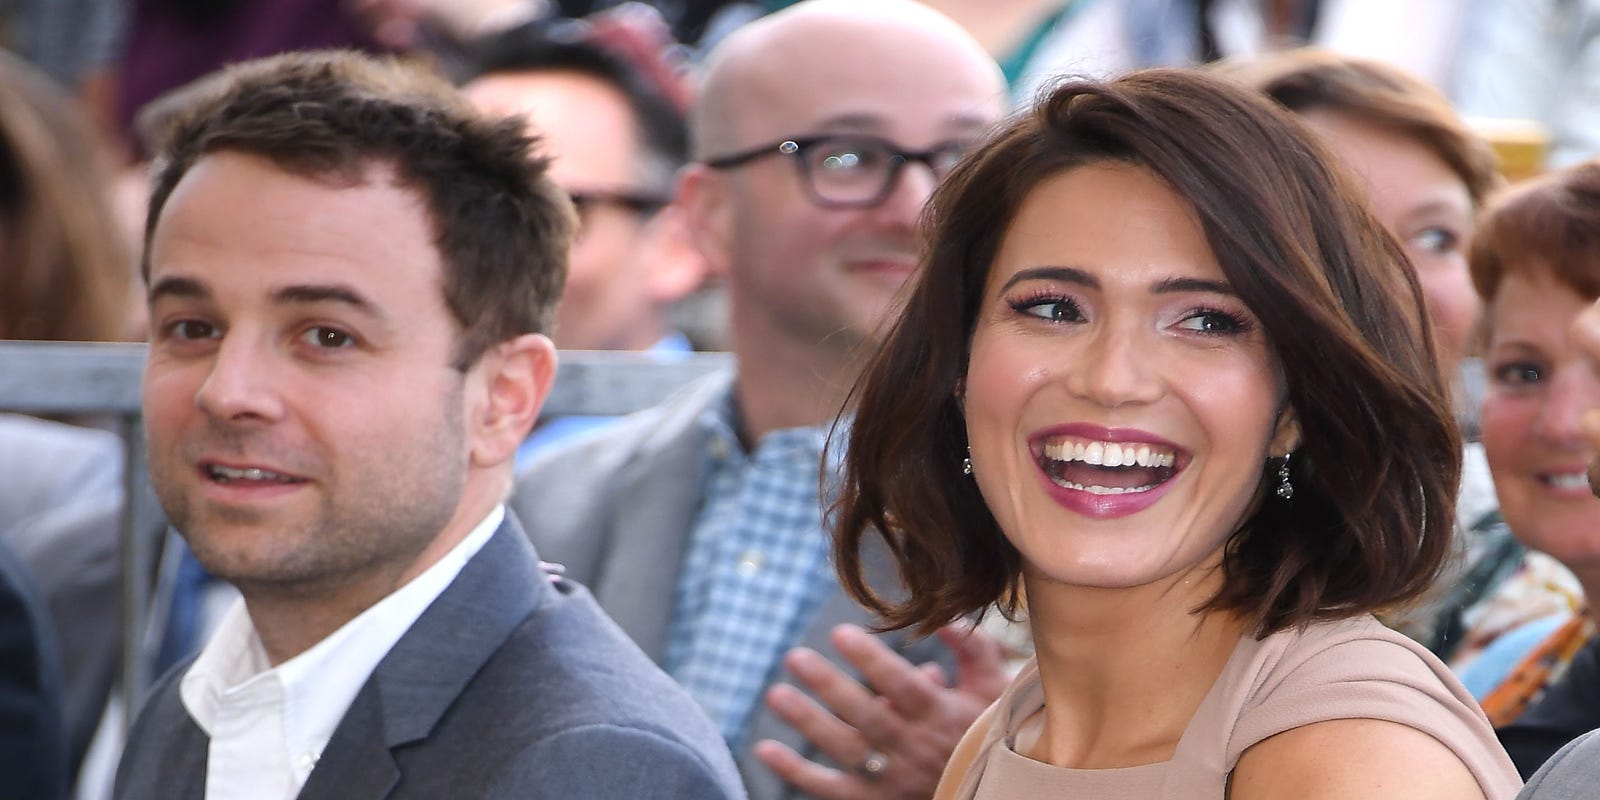 Mandy Moore Is Expecting Her First Child With Husband Taylor Goldsmith